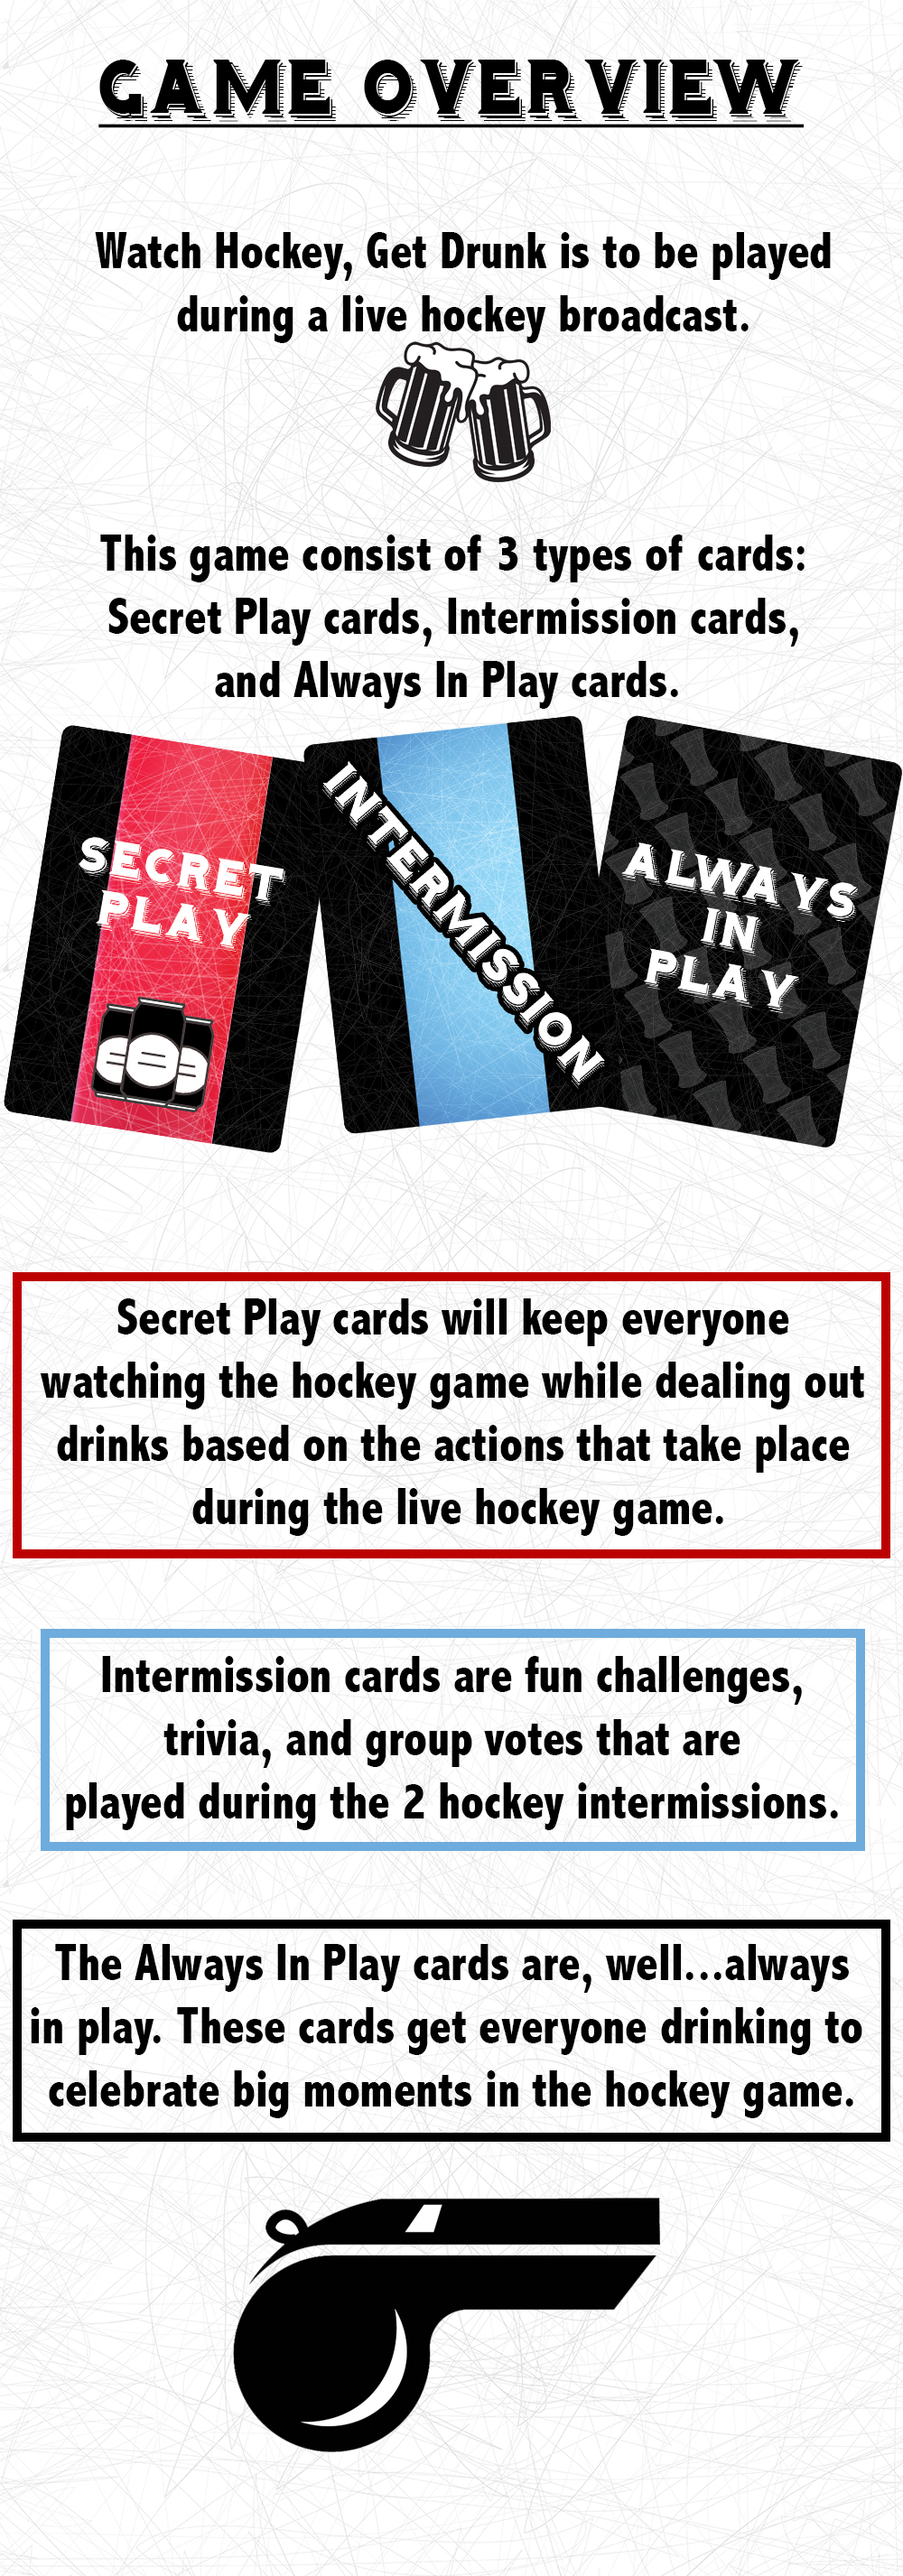 Watch Hockey, Get Drunk by Falling Whale Games